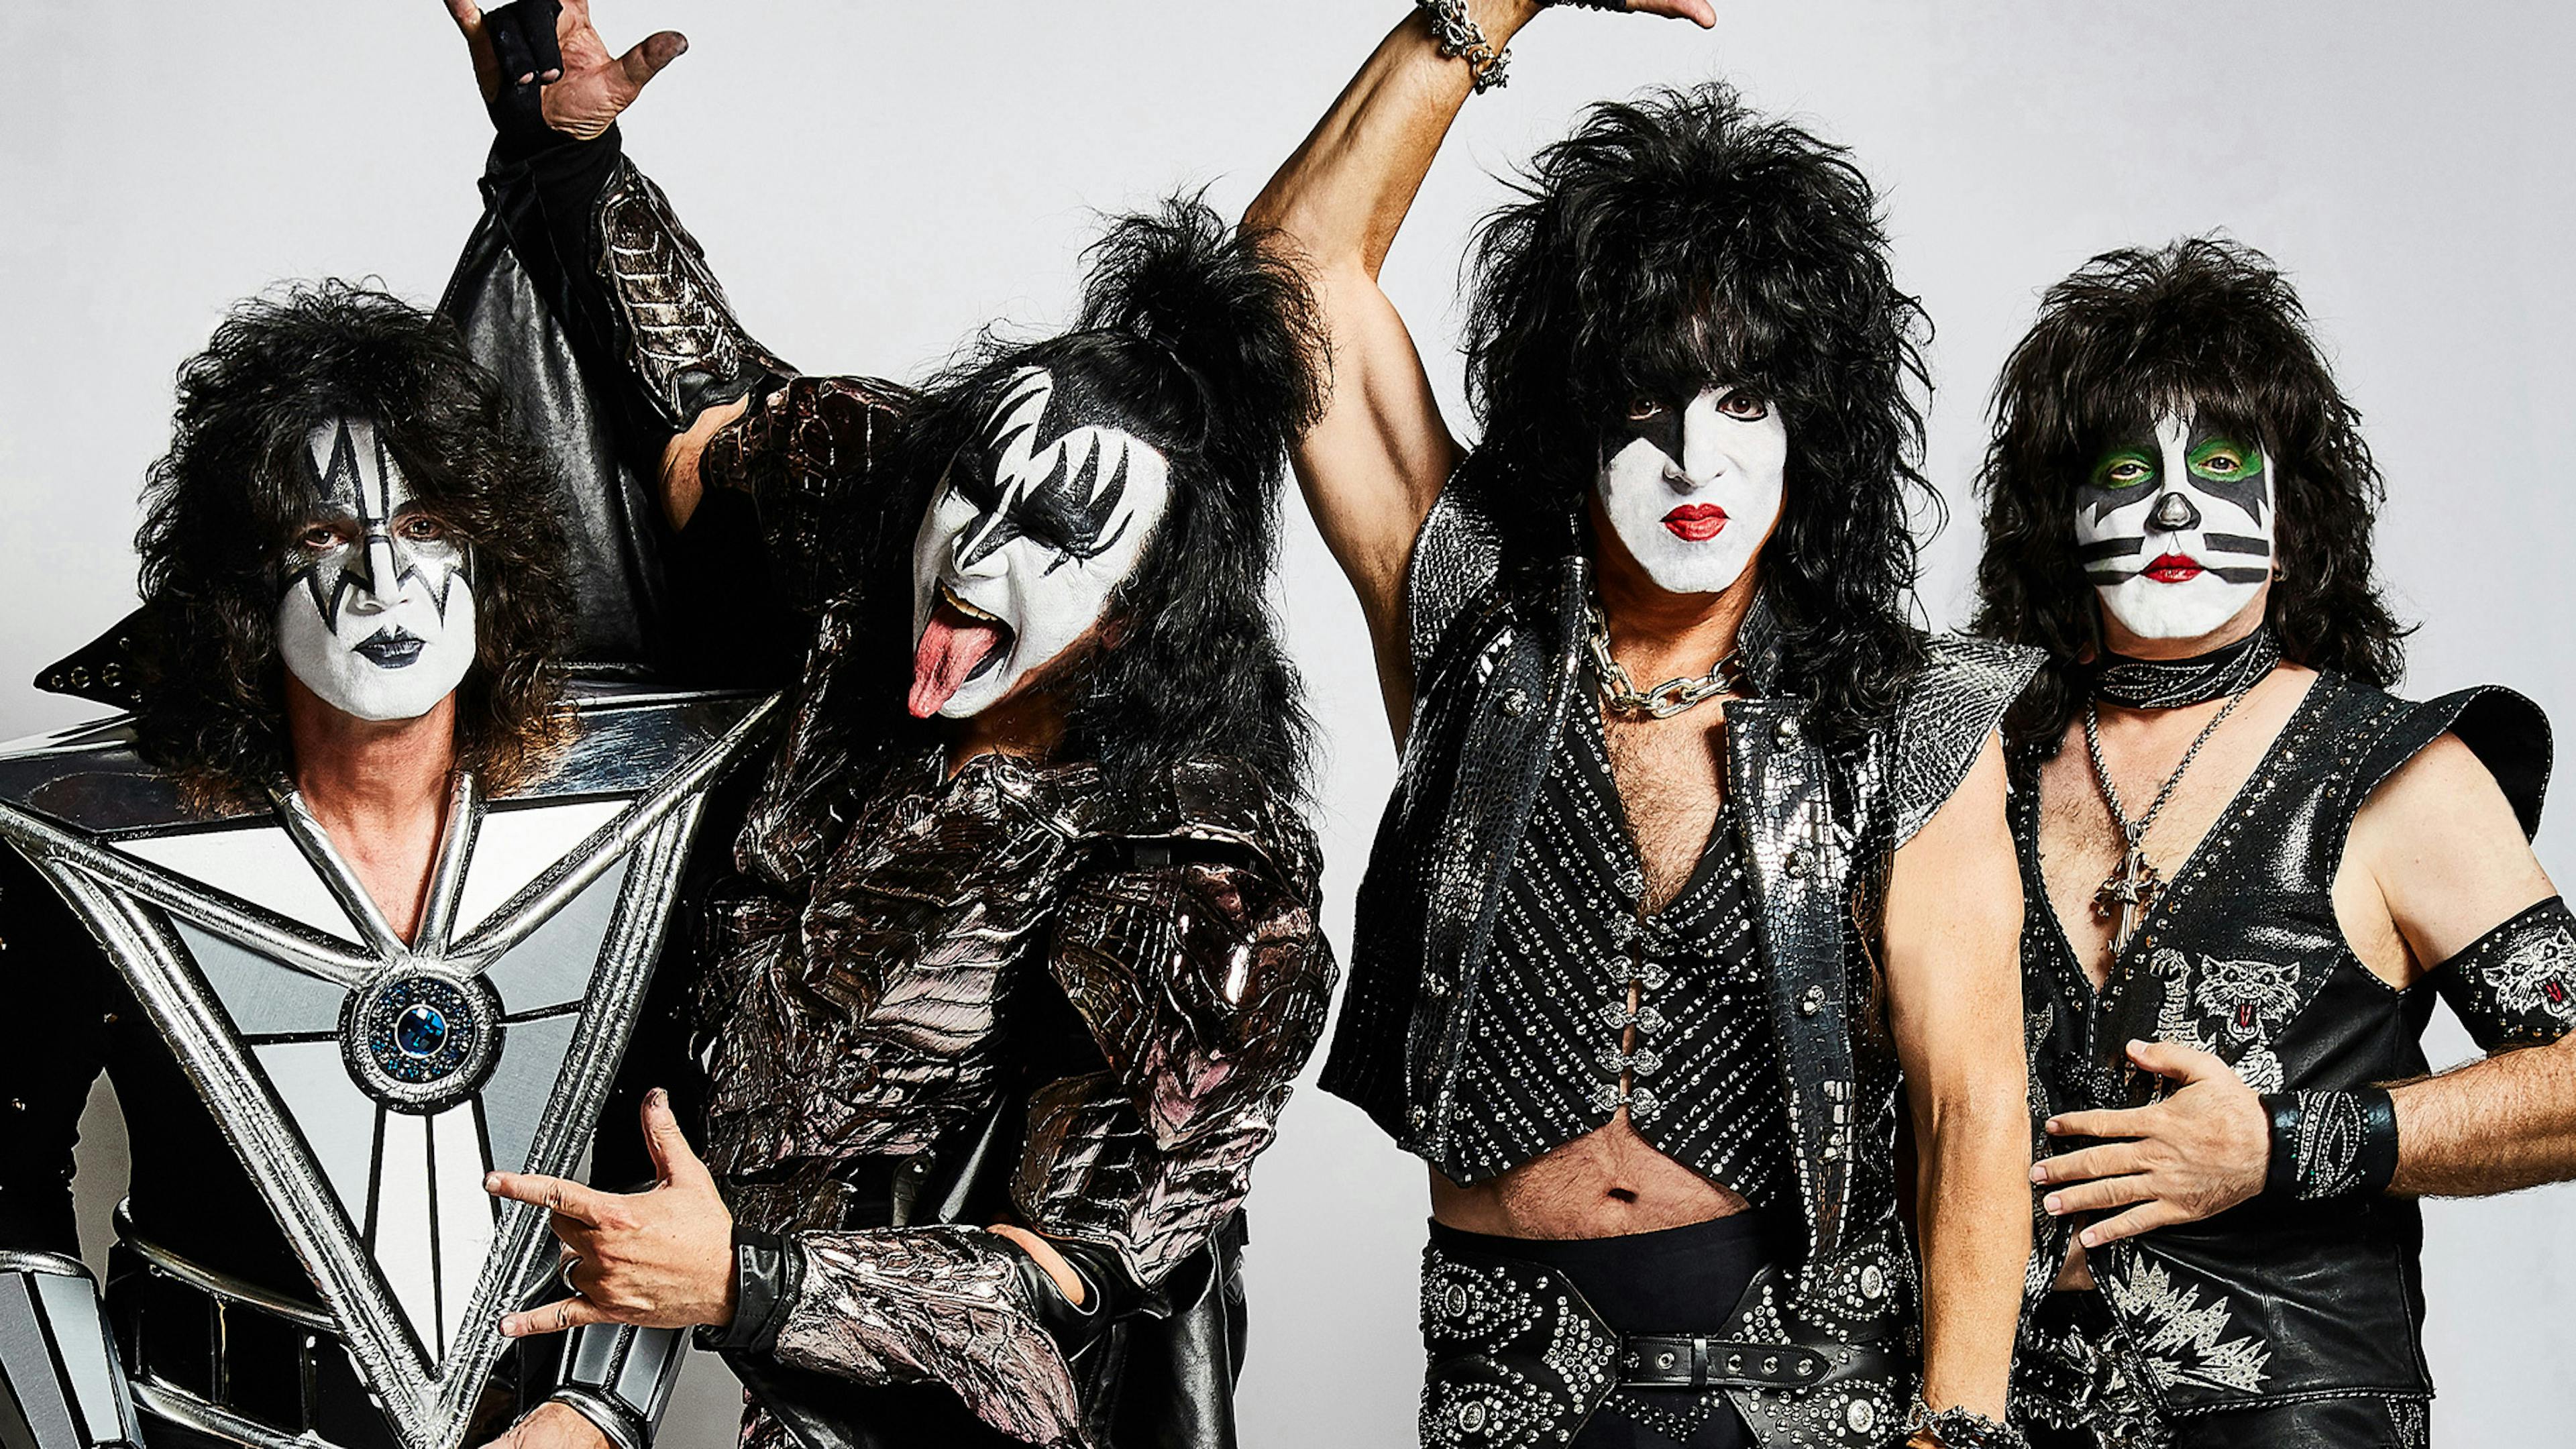 Paul Stanley: I don't really see a reason for KISS to record new music